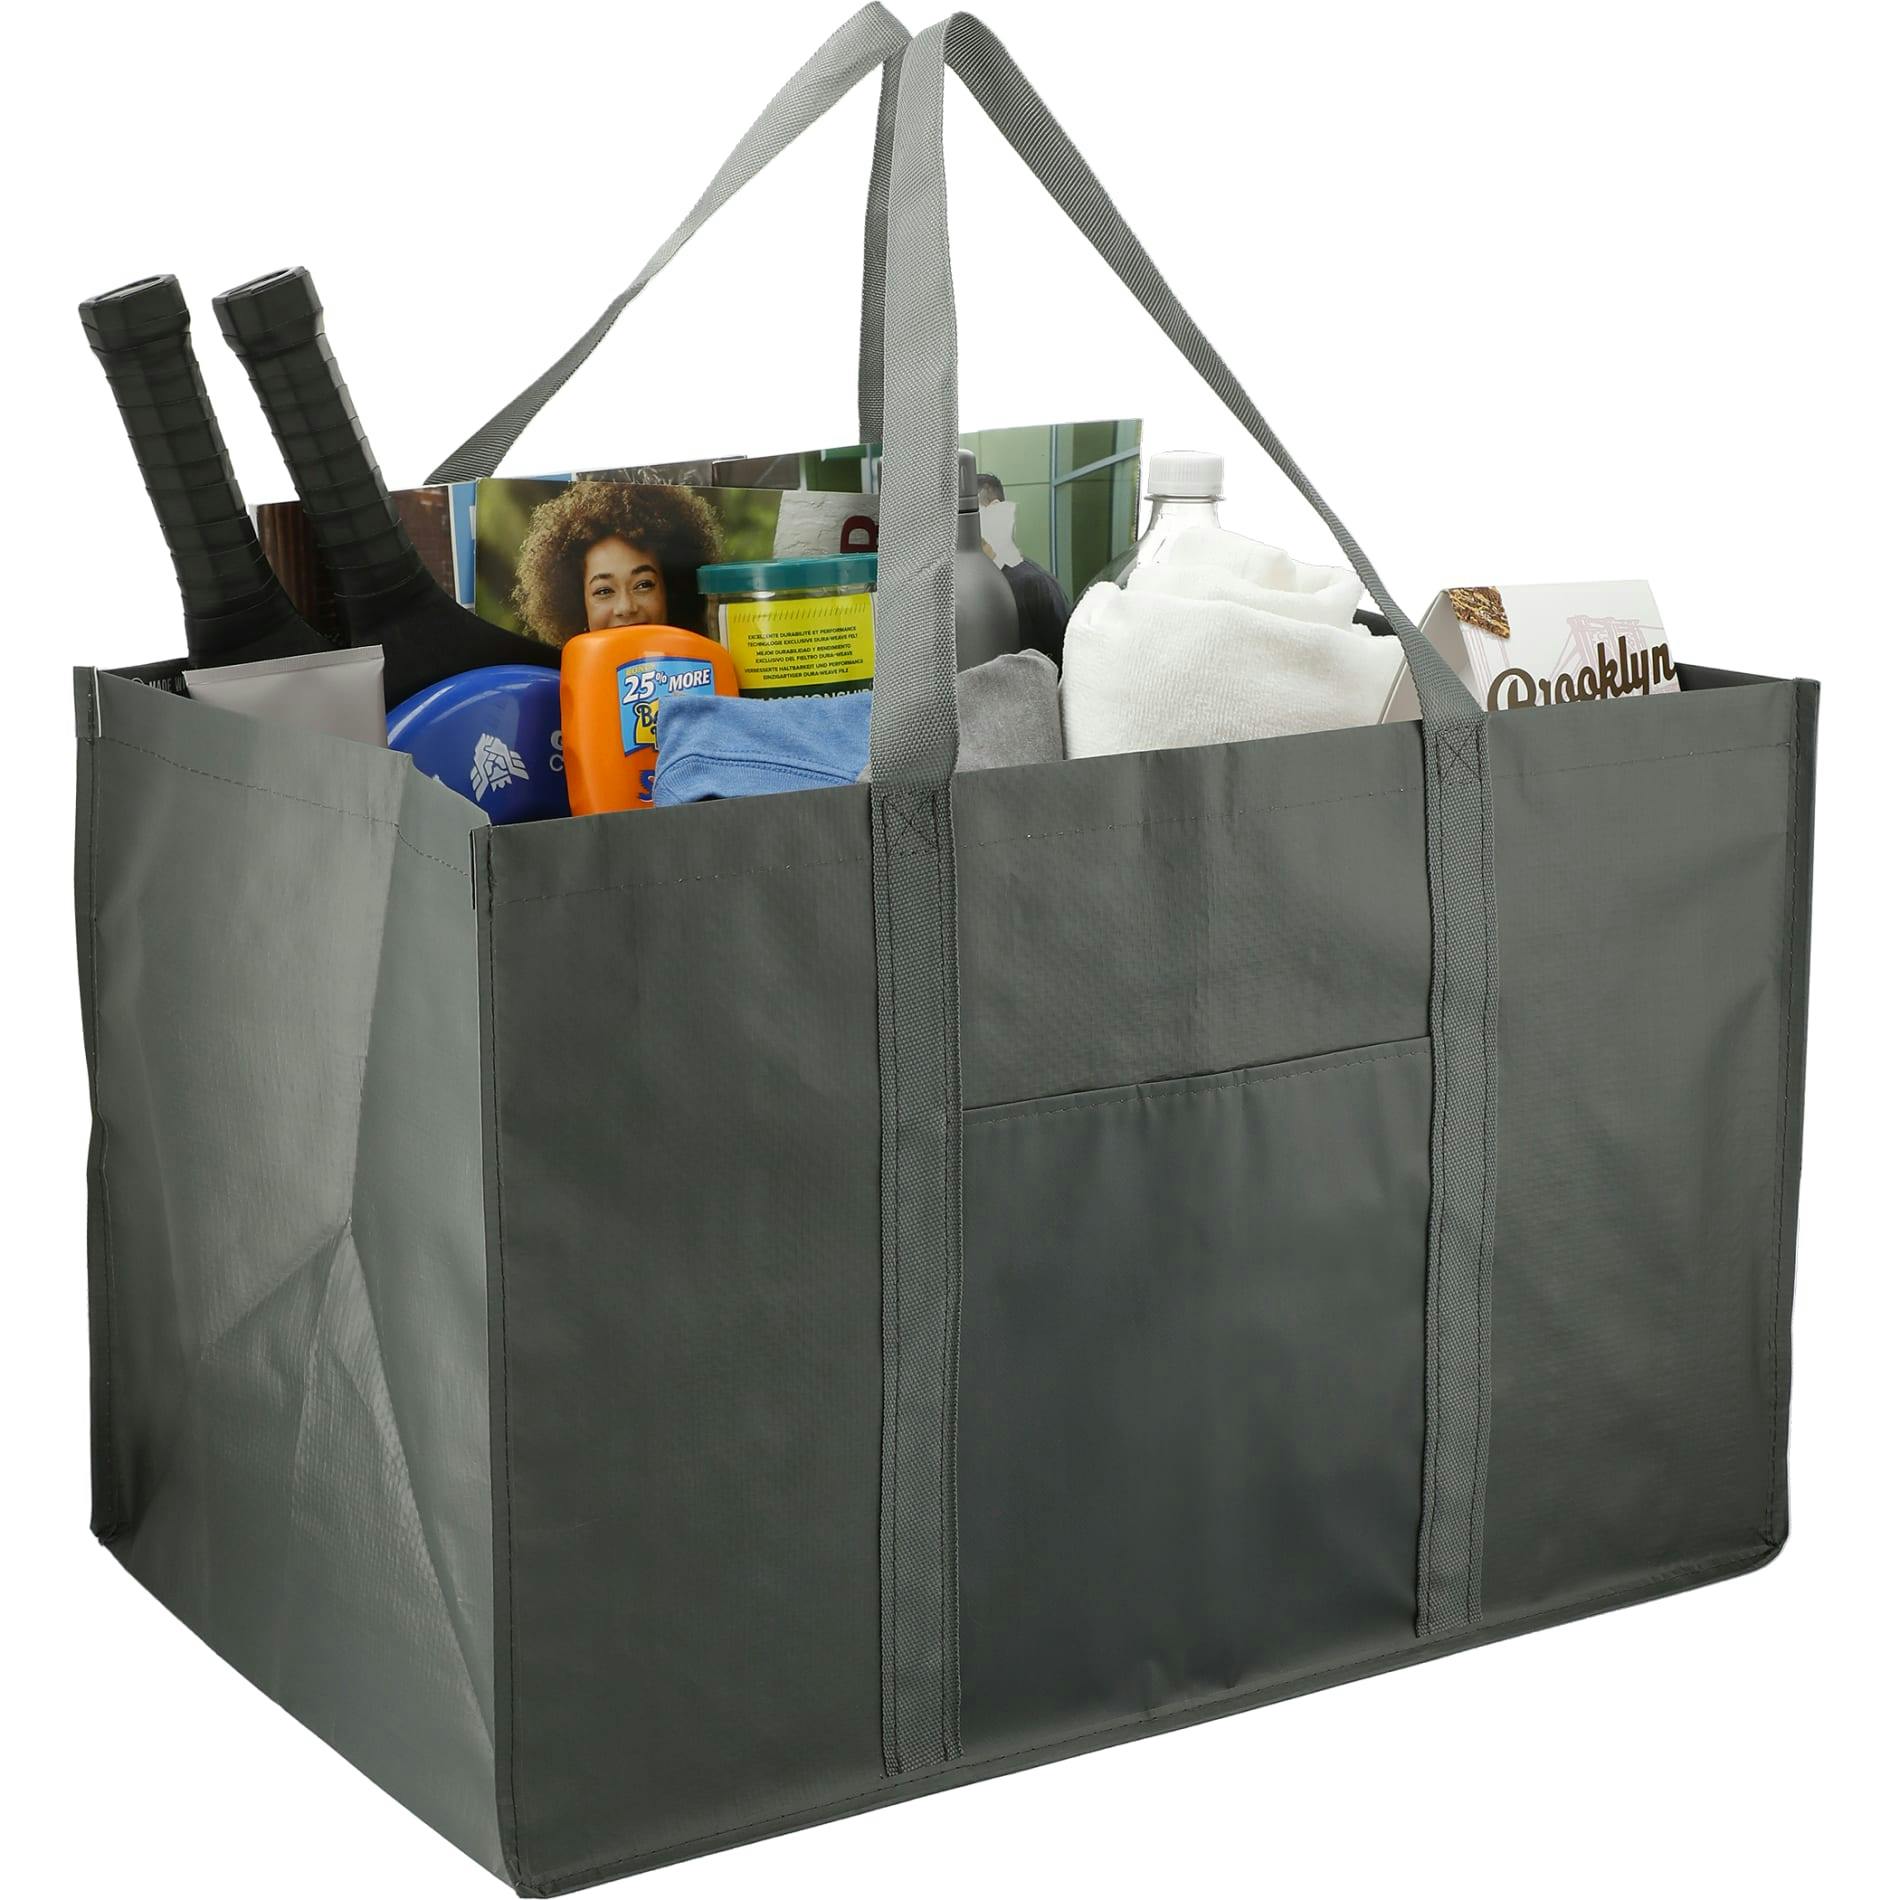 Recycled Woven Utility Tote - additional Image 1